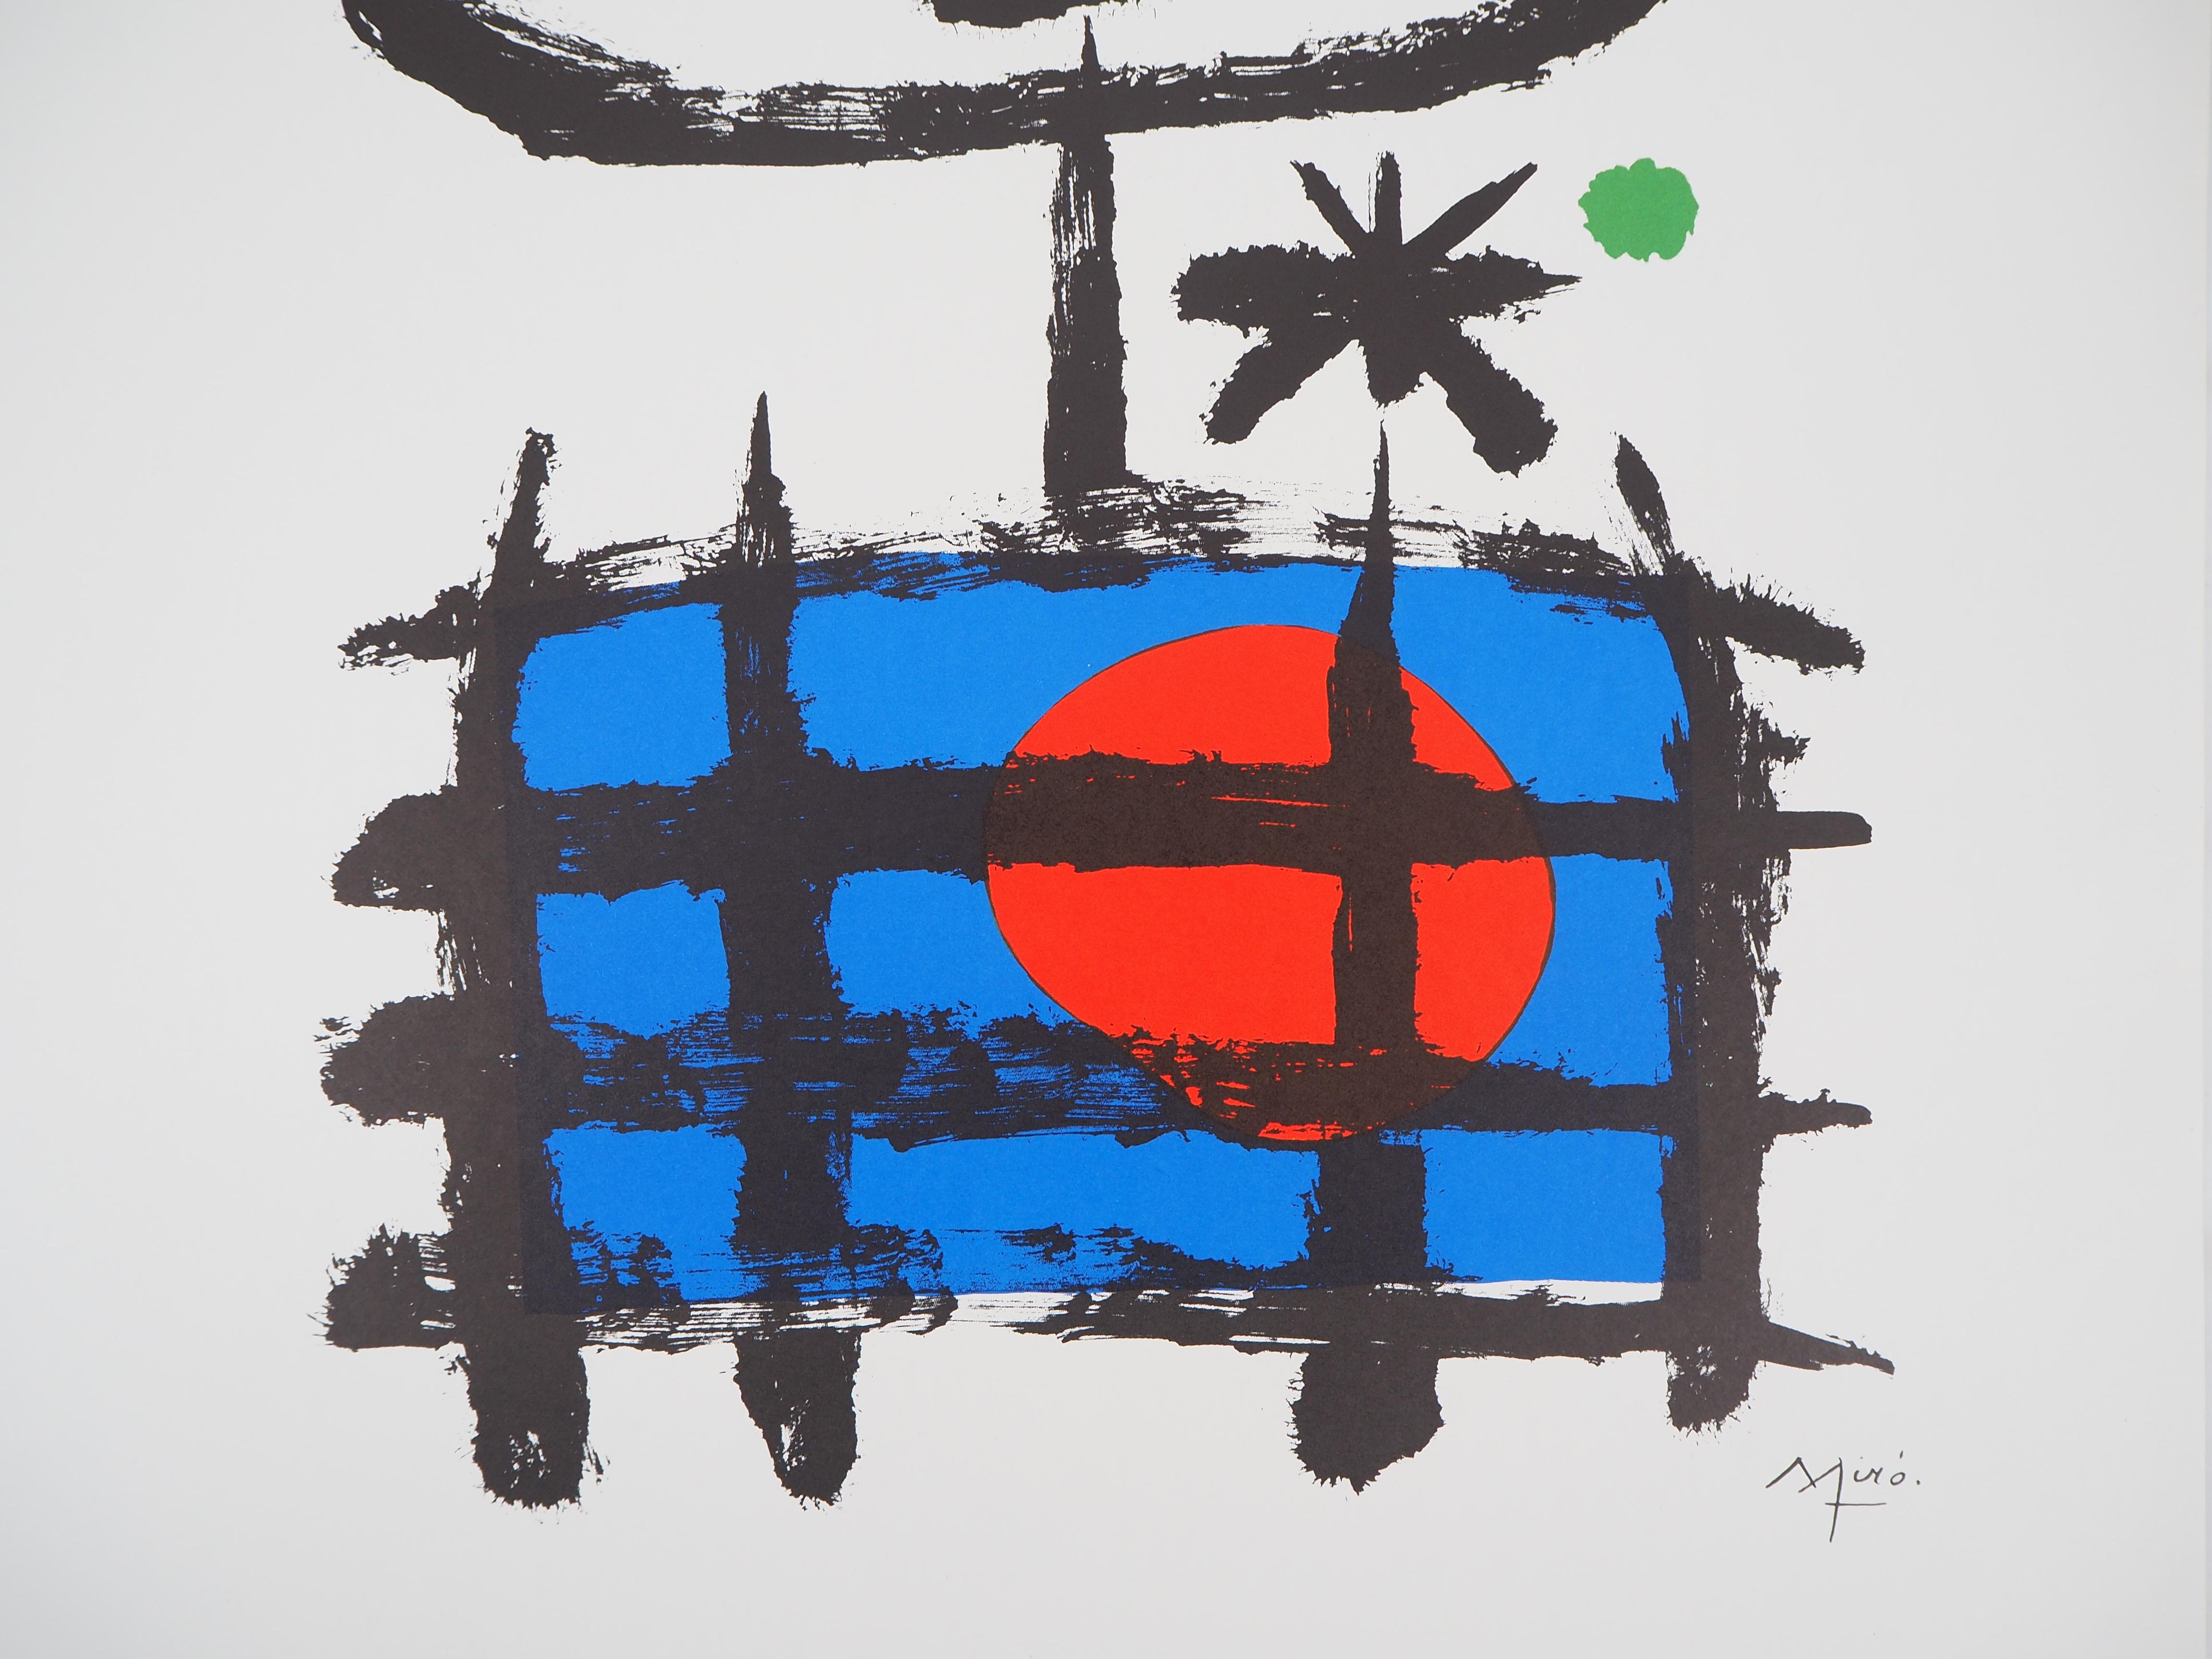 Joan MIRO (after)
Imaginary Boy with Red Sun 

Lithograph
Printed signature in the plate
On heavy paper 65 x 49 cm (c. 26 x 20 in)
Edited by galerie Maeght c. 1990

Excellent condition